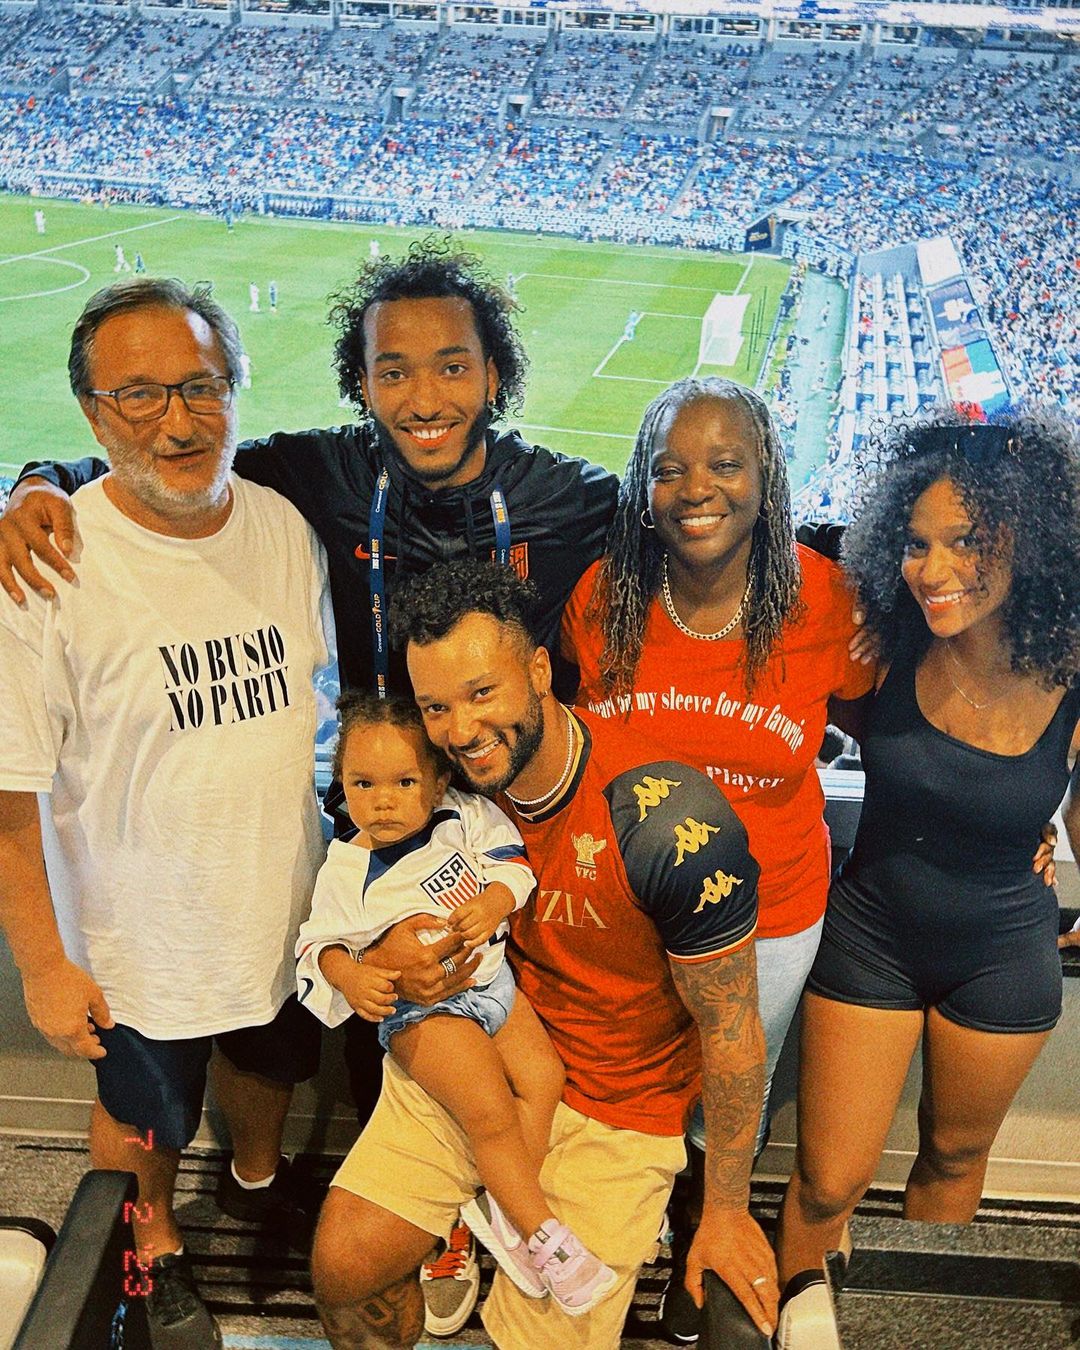 Gianluca Busio Score First International Goal Amidst Family At Bank of America Stadium